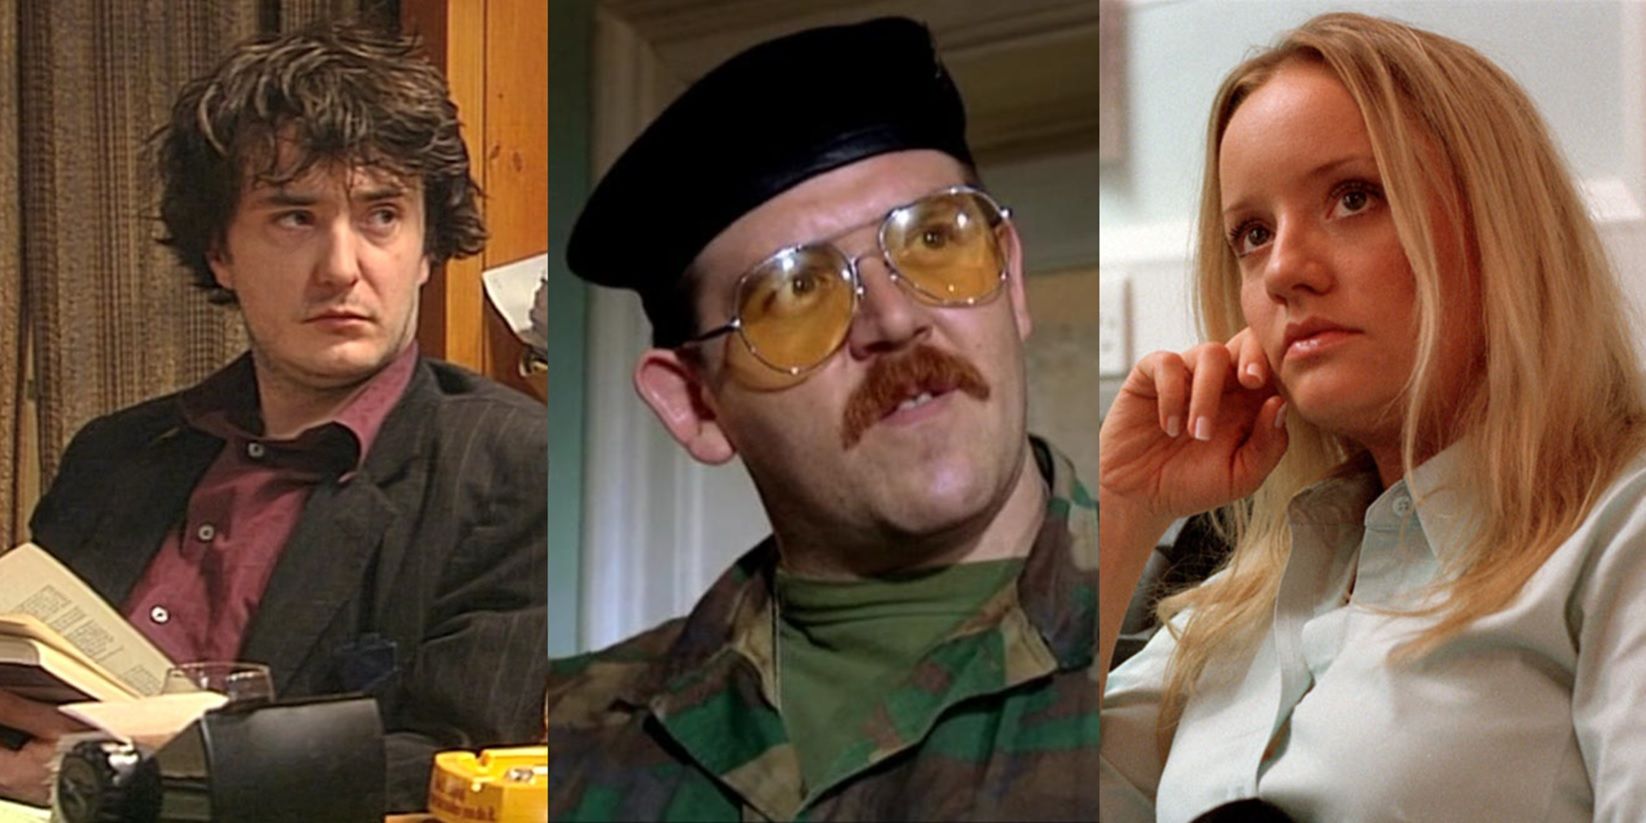 Dylan Moran in Black Books, Nick Frost in Spaced, and Lucy Davis in The Office